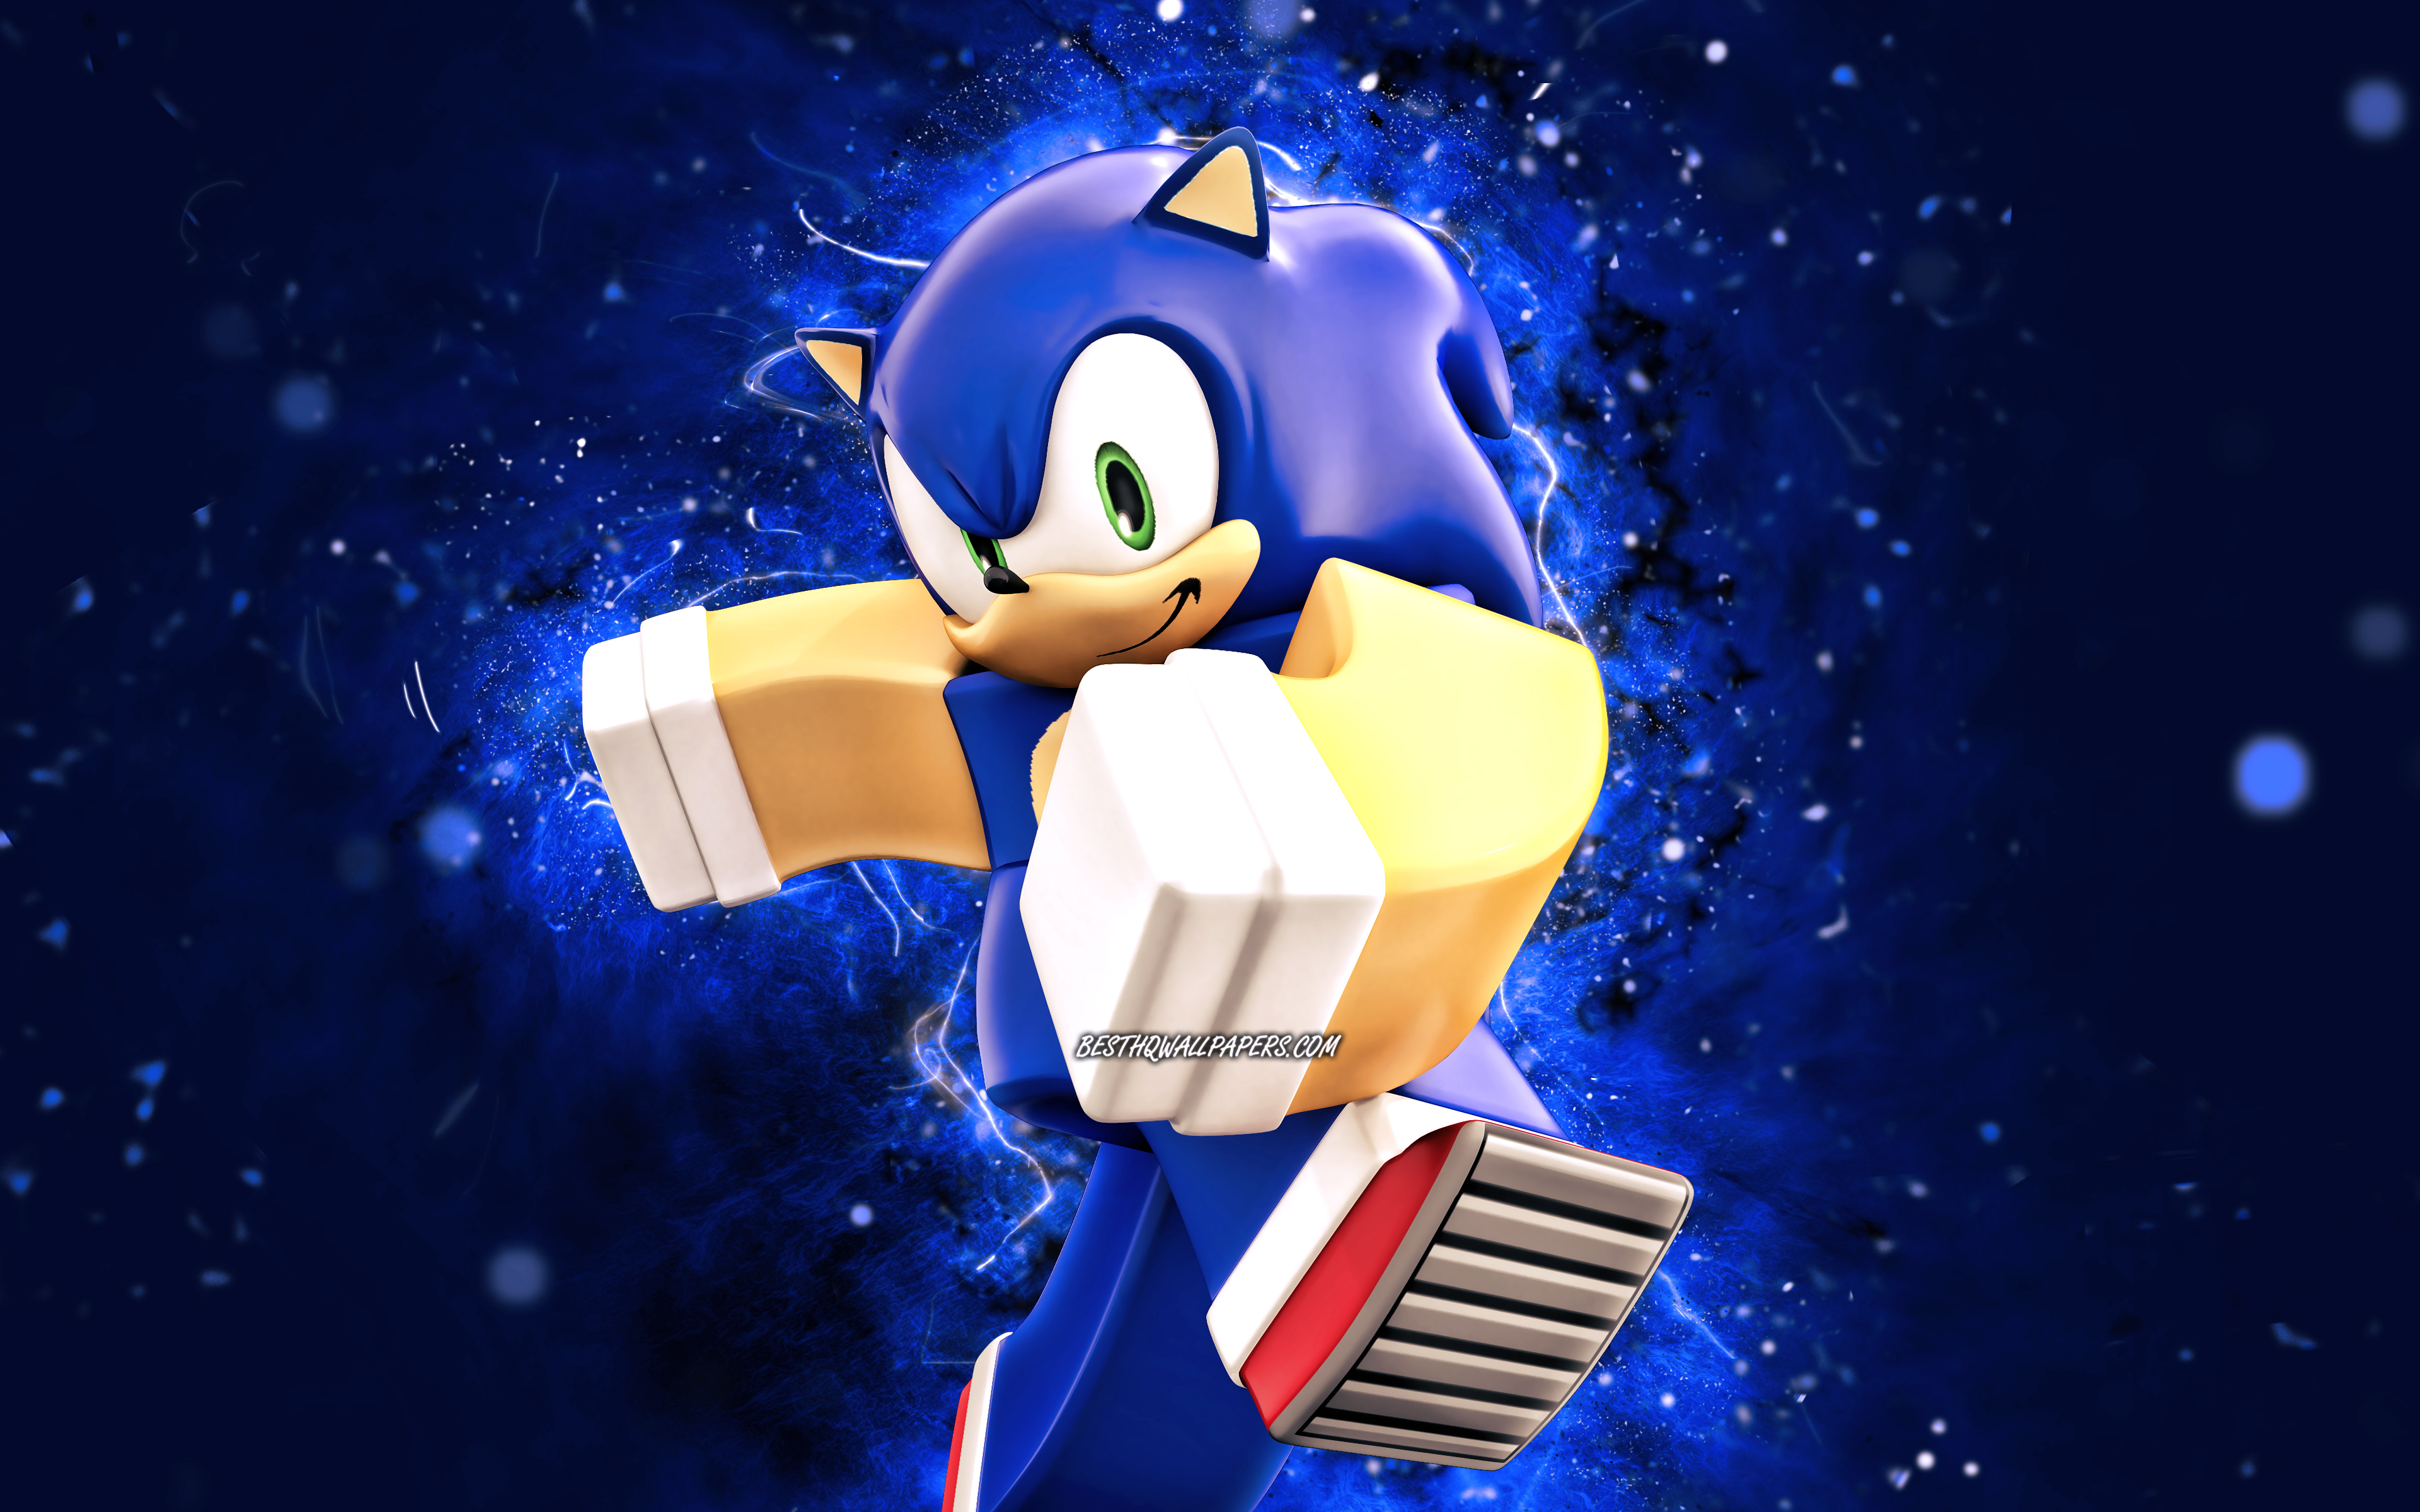 Download wallpaper Sonic the Hedgehog, 4k, blue neon lights, Roblox, Heroes of Robloxia, Roblox characters, Sonic Roblox, Sonic the Hedgehog Roblox, Sonic the Roblox for desktop with resolution 3840x2400. High Quality HD